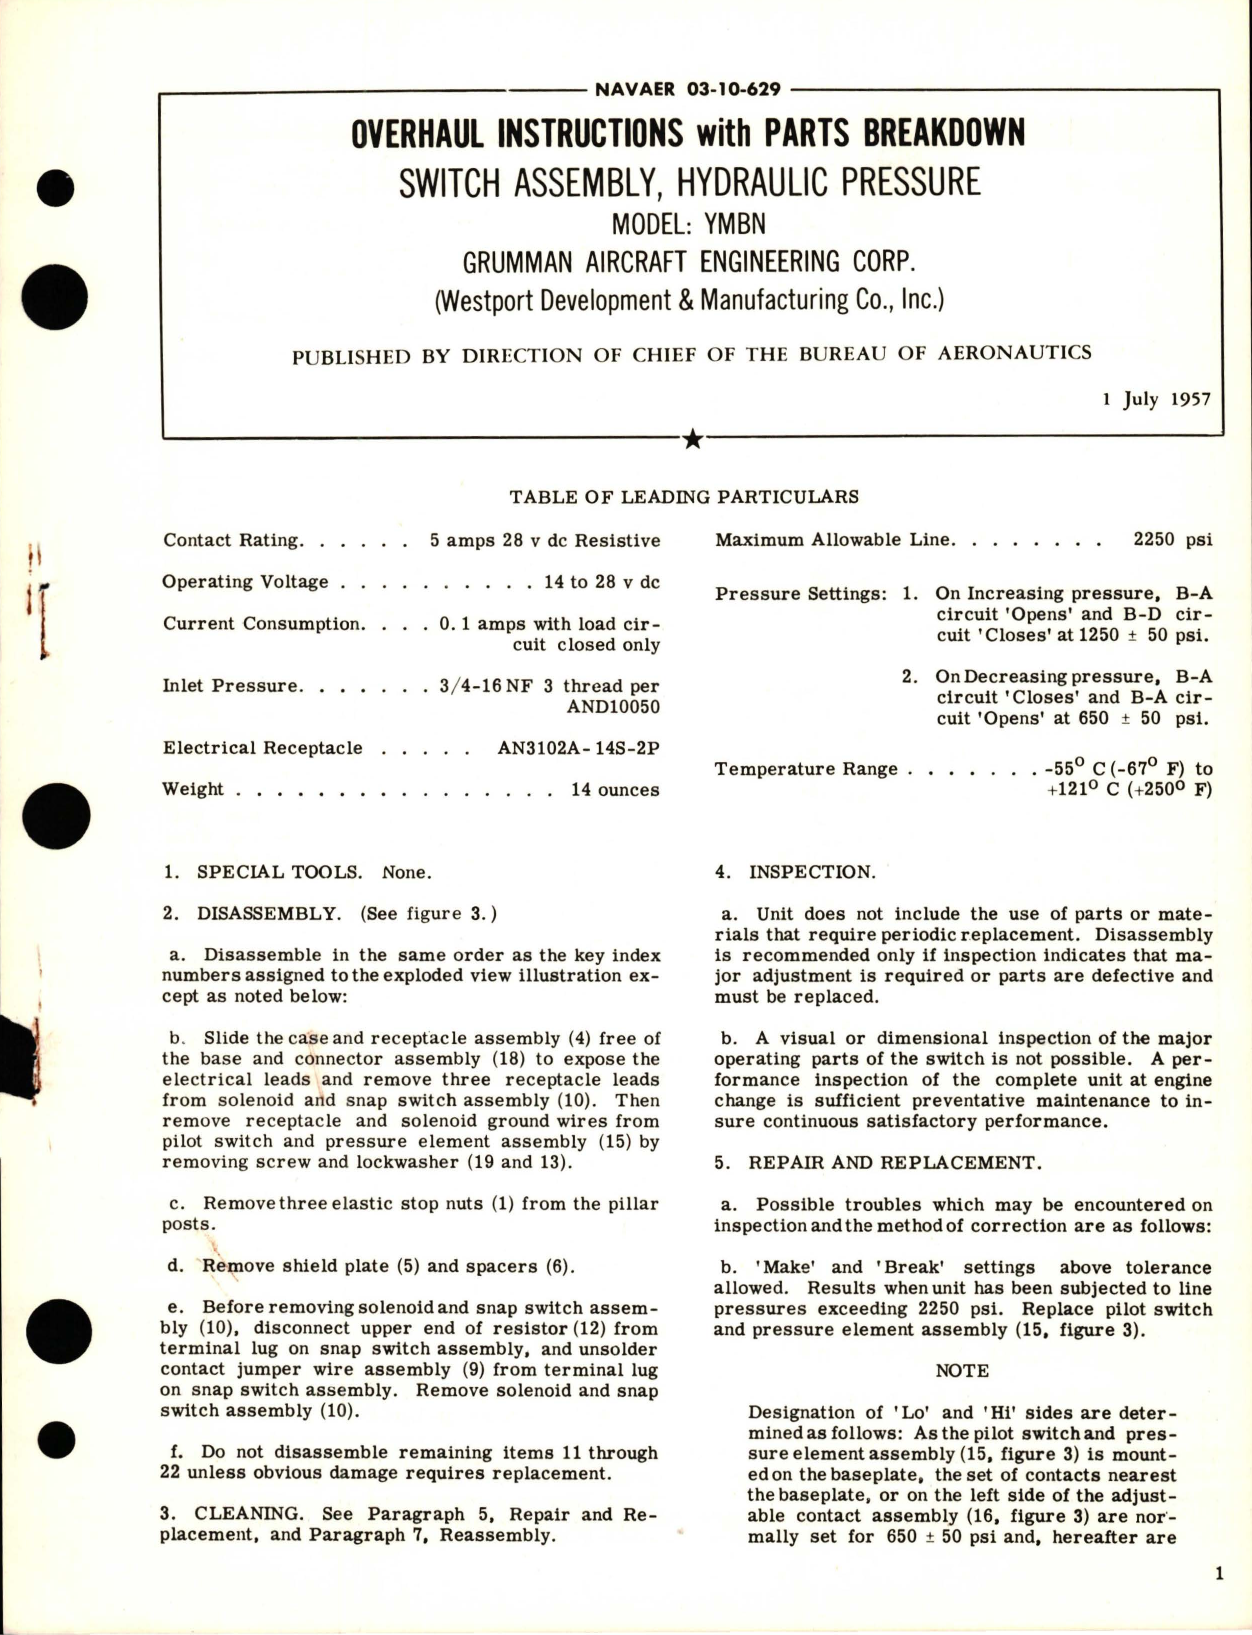 Sample page 1 from AirCorps Library document: Overhaul Instructions with Parts Breakdown for Hydraulic Pressure Switch Assembly - Model YMBN